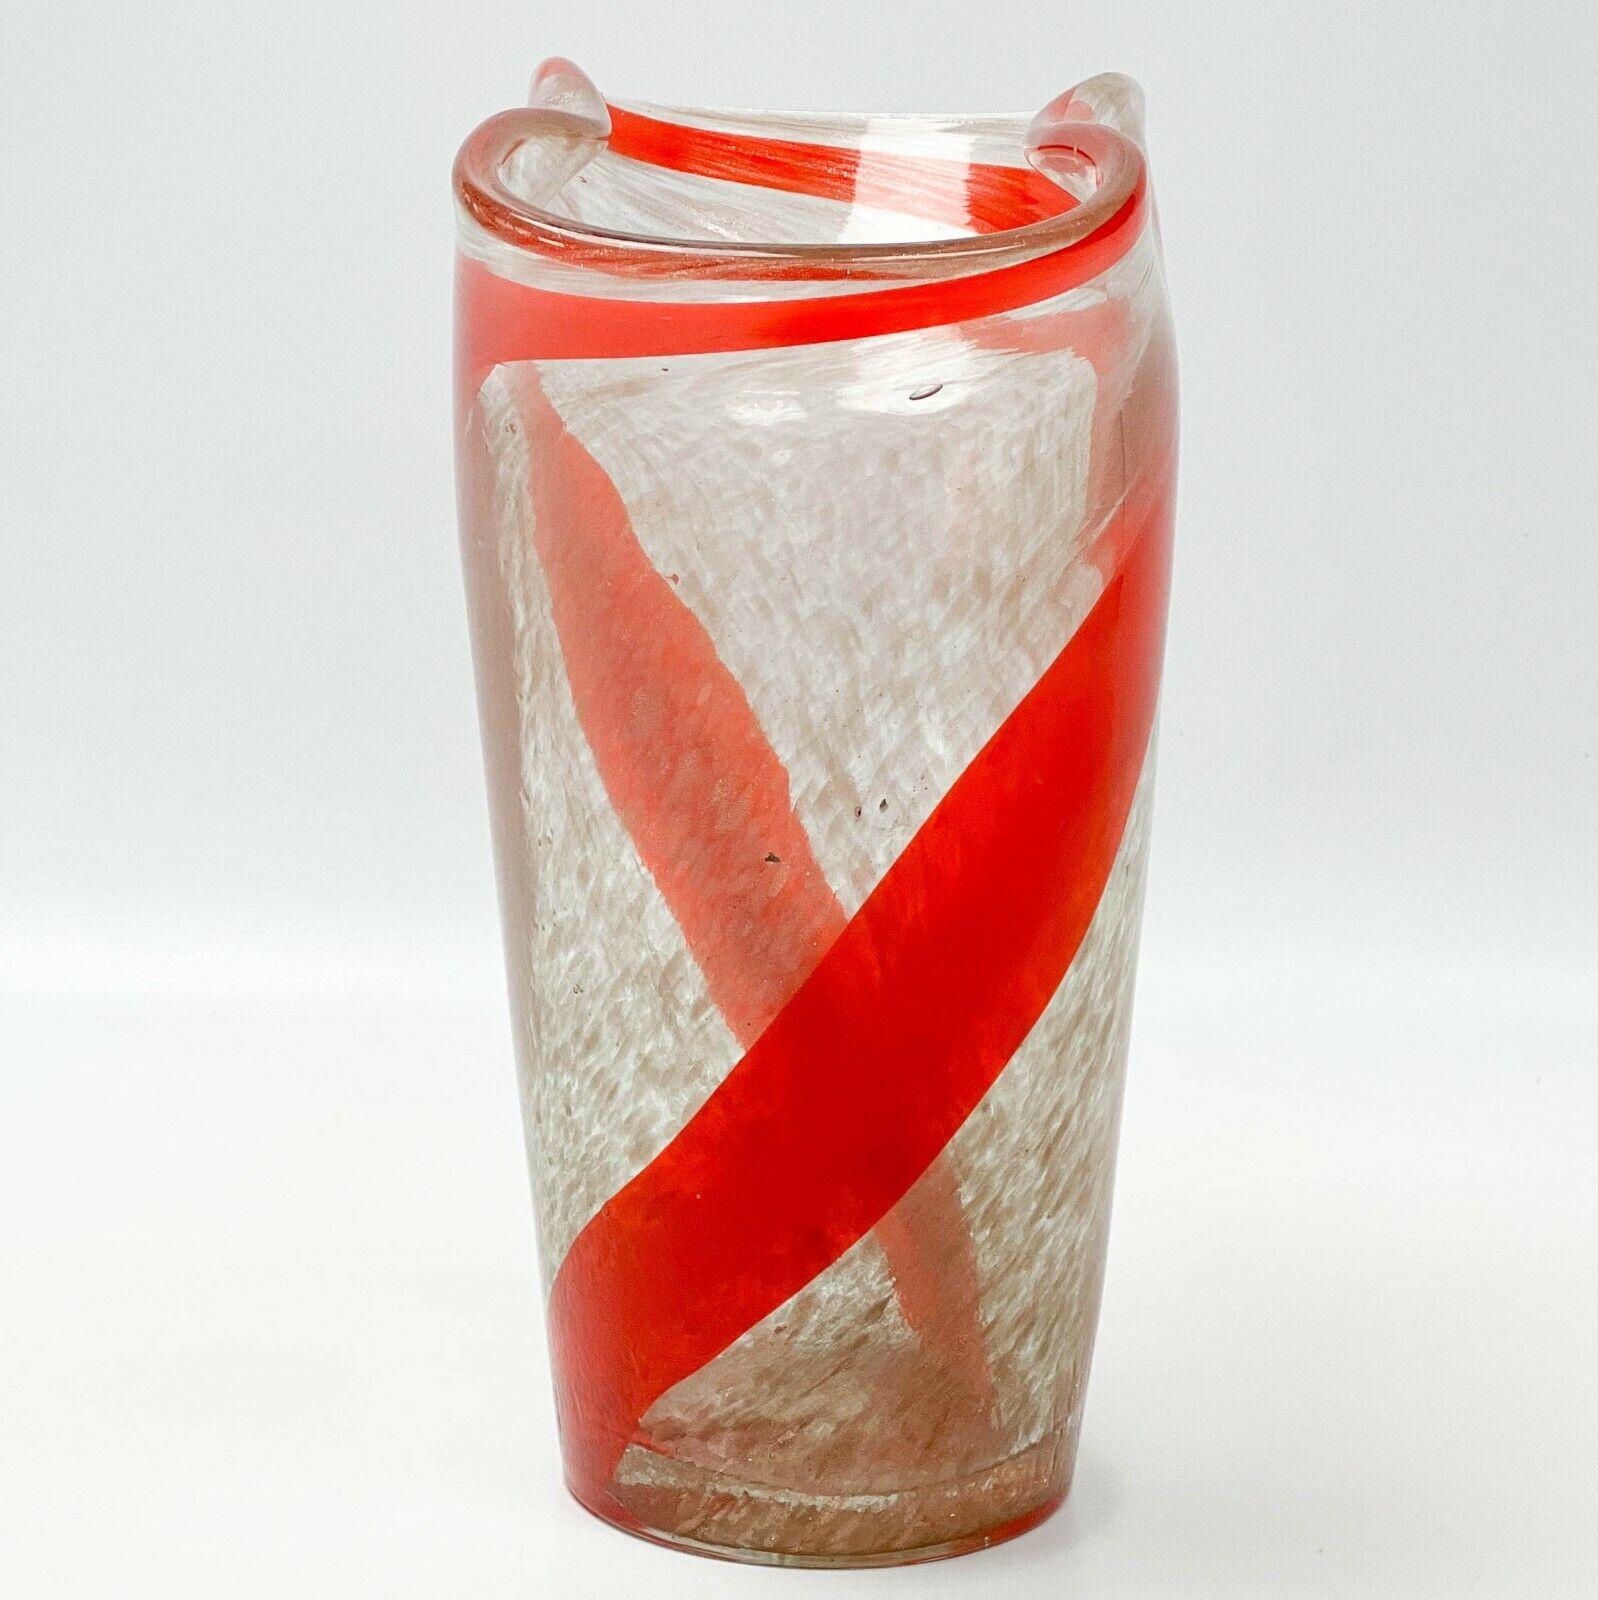 Fratelli Toso Italian Murano Art Glass Aventurine vase

Vase with Aventurine glass and a swirled red ribbon design with a curved rim. Murano label to the underside.

Additional Information:
Country/Region of Manufacture: Italy 
Material: